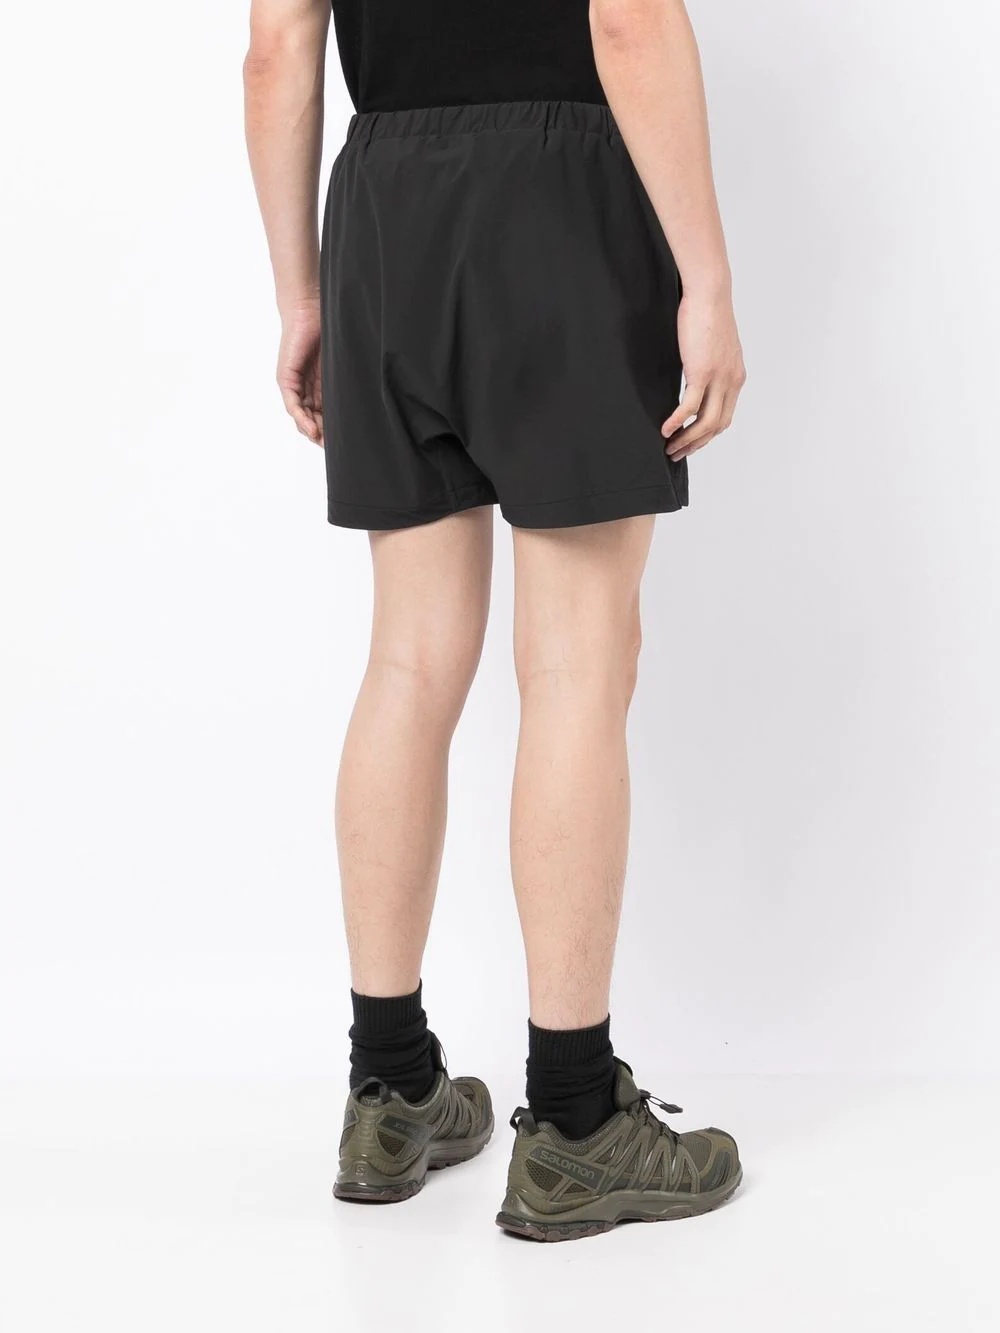 embroidered-logo detail shorts - 4